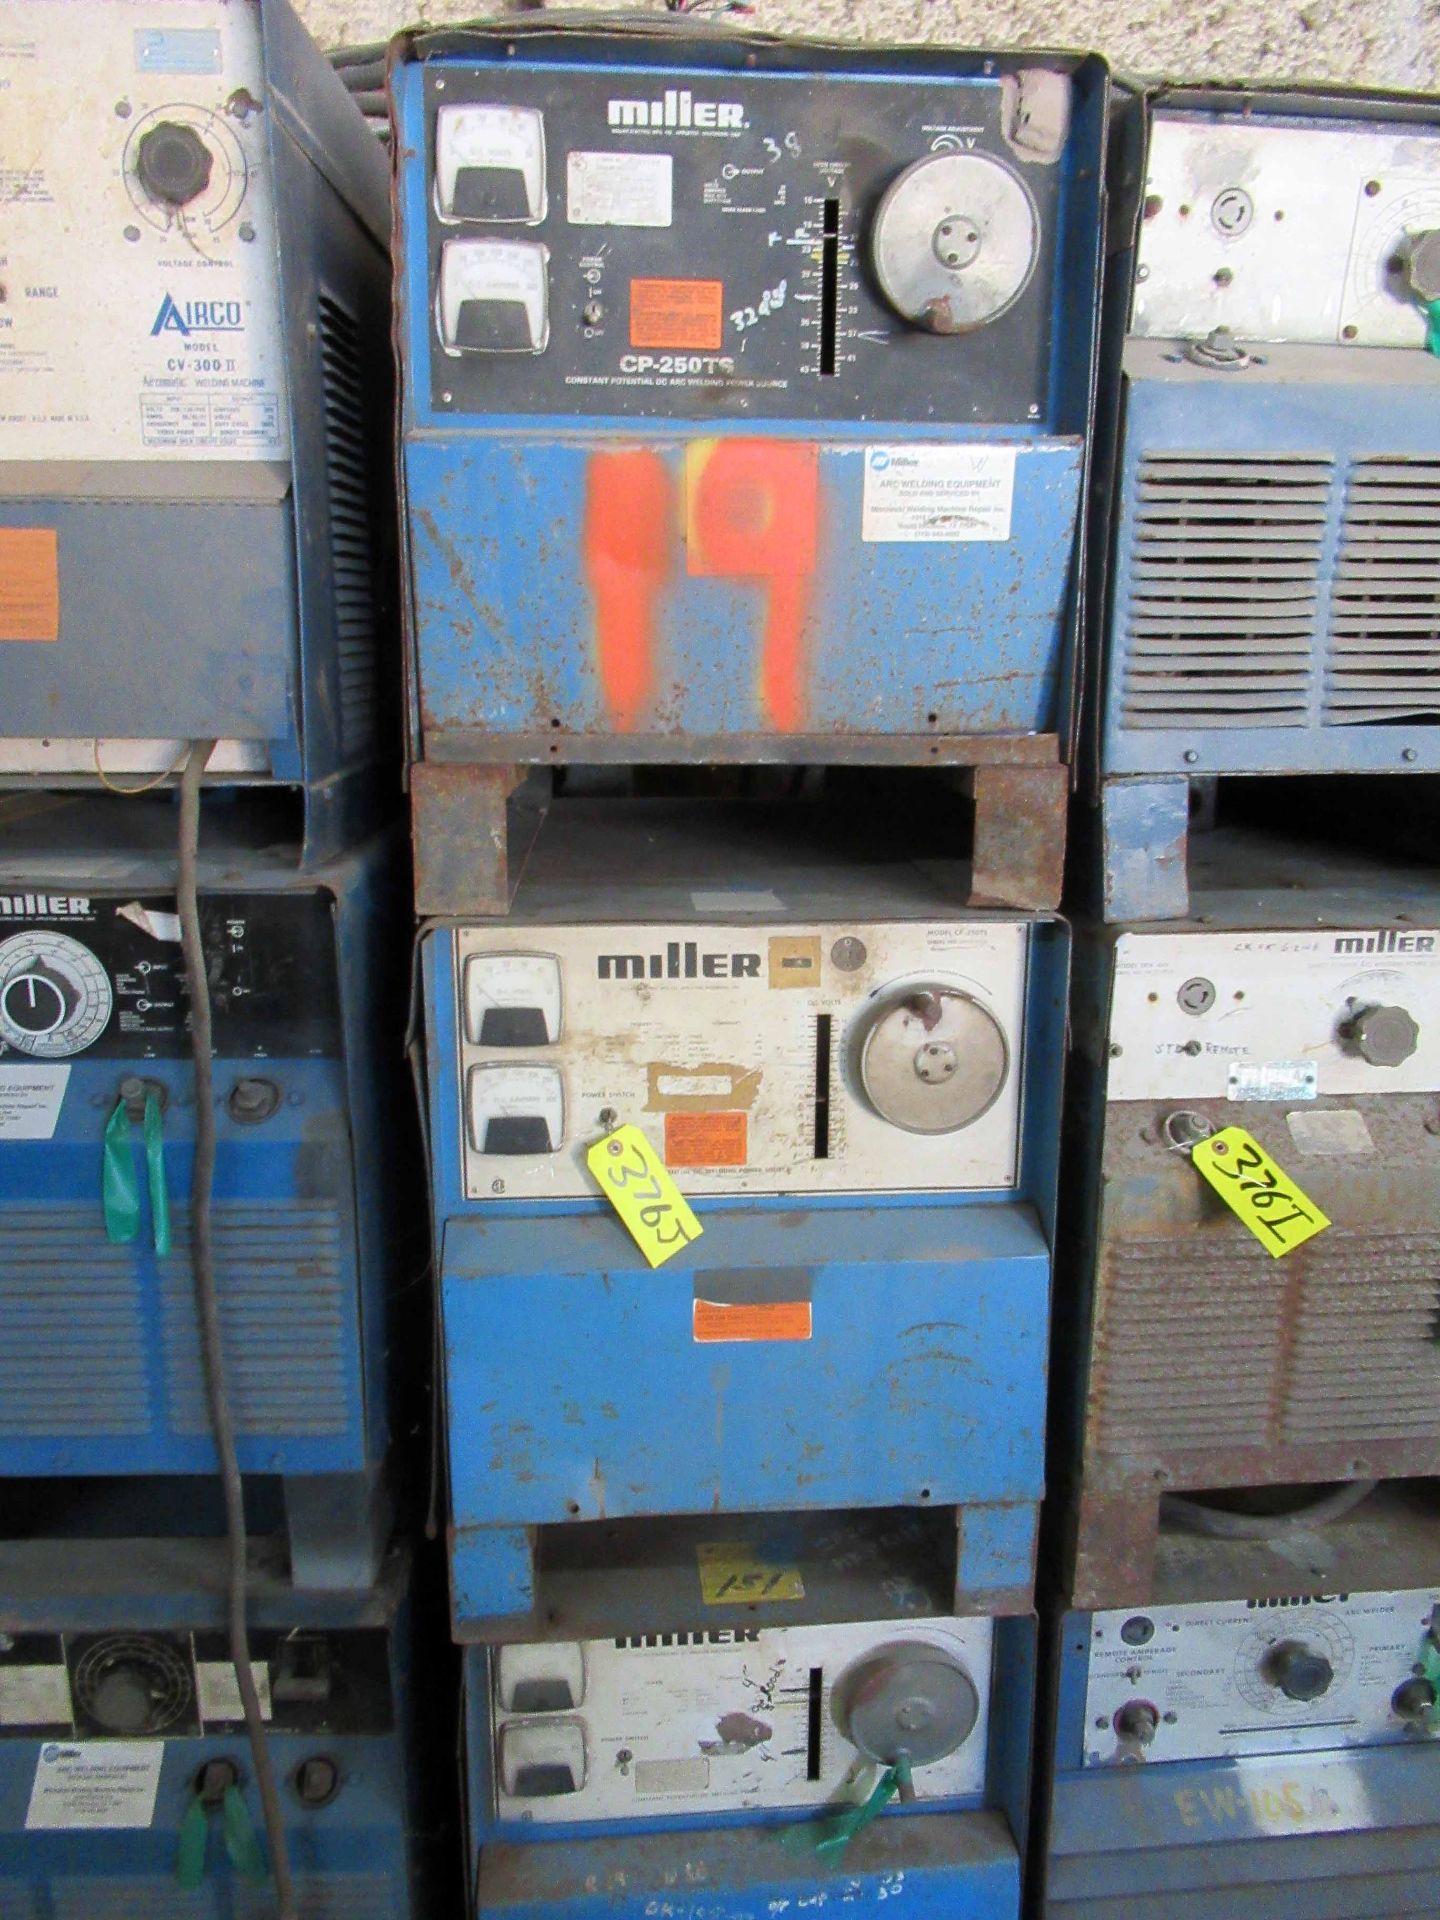 LOT OF WELDERS (3), MILLER CP-250-TS (Located at: Precision Welding & Fabrication, 407 Midland